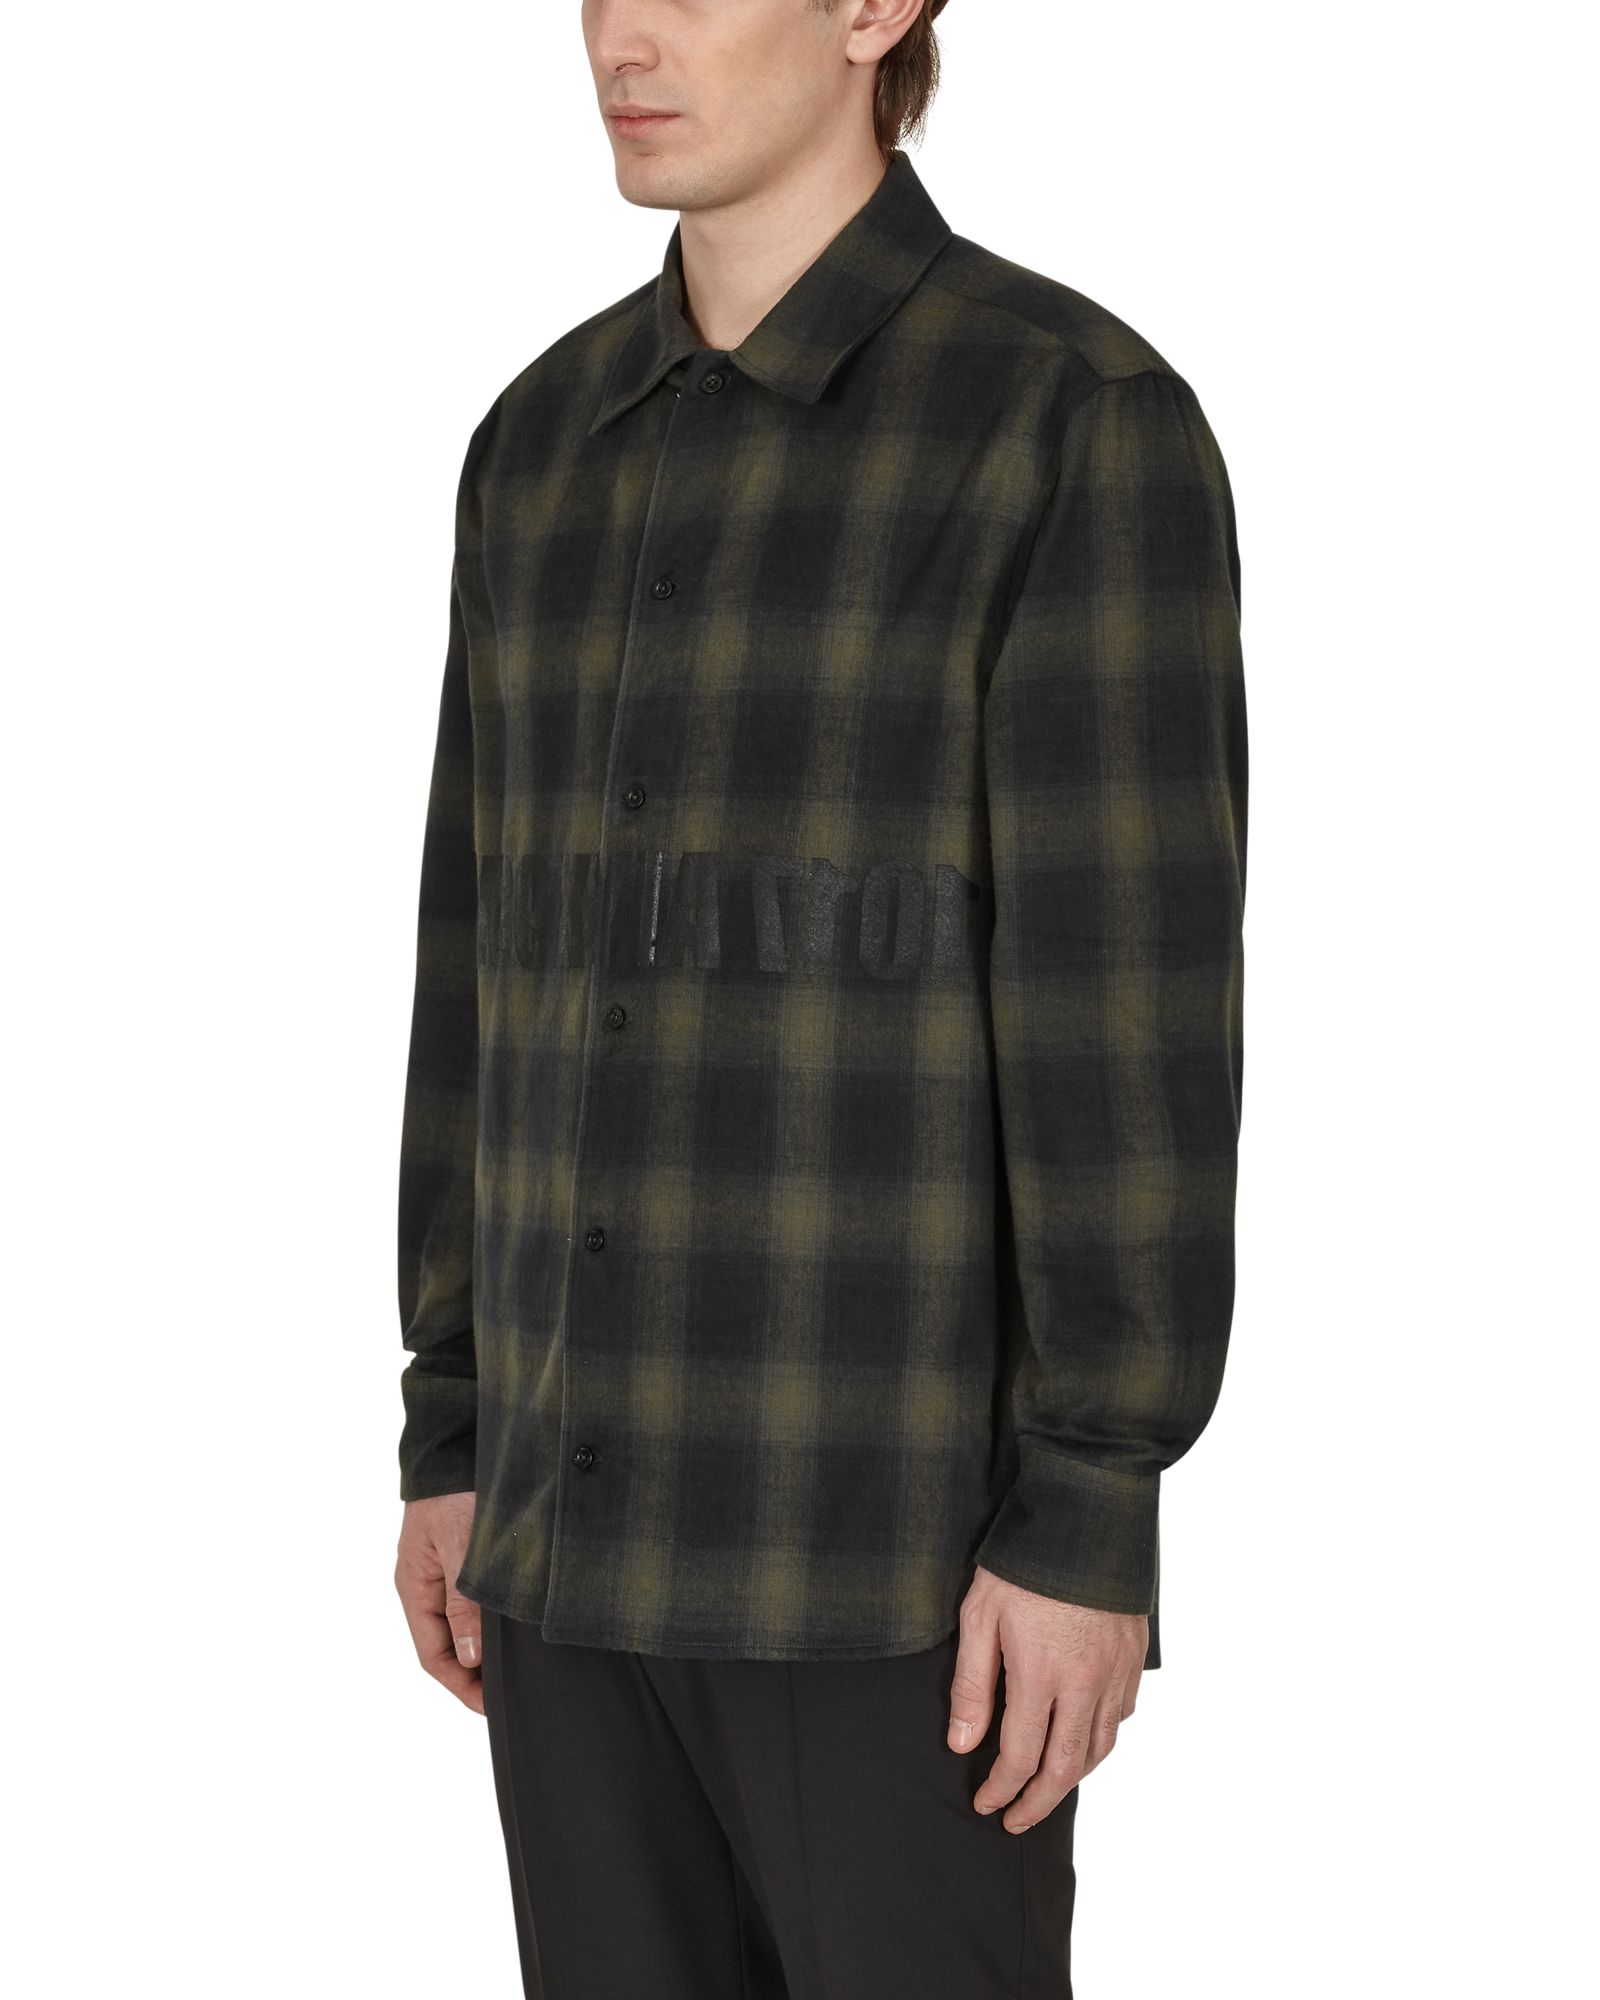 GRAPHIC FLANNEL SHIRT